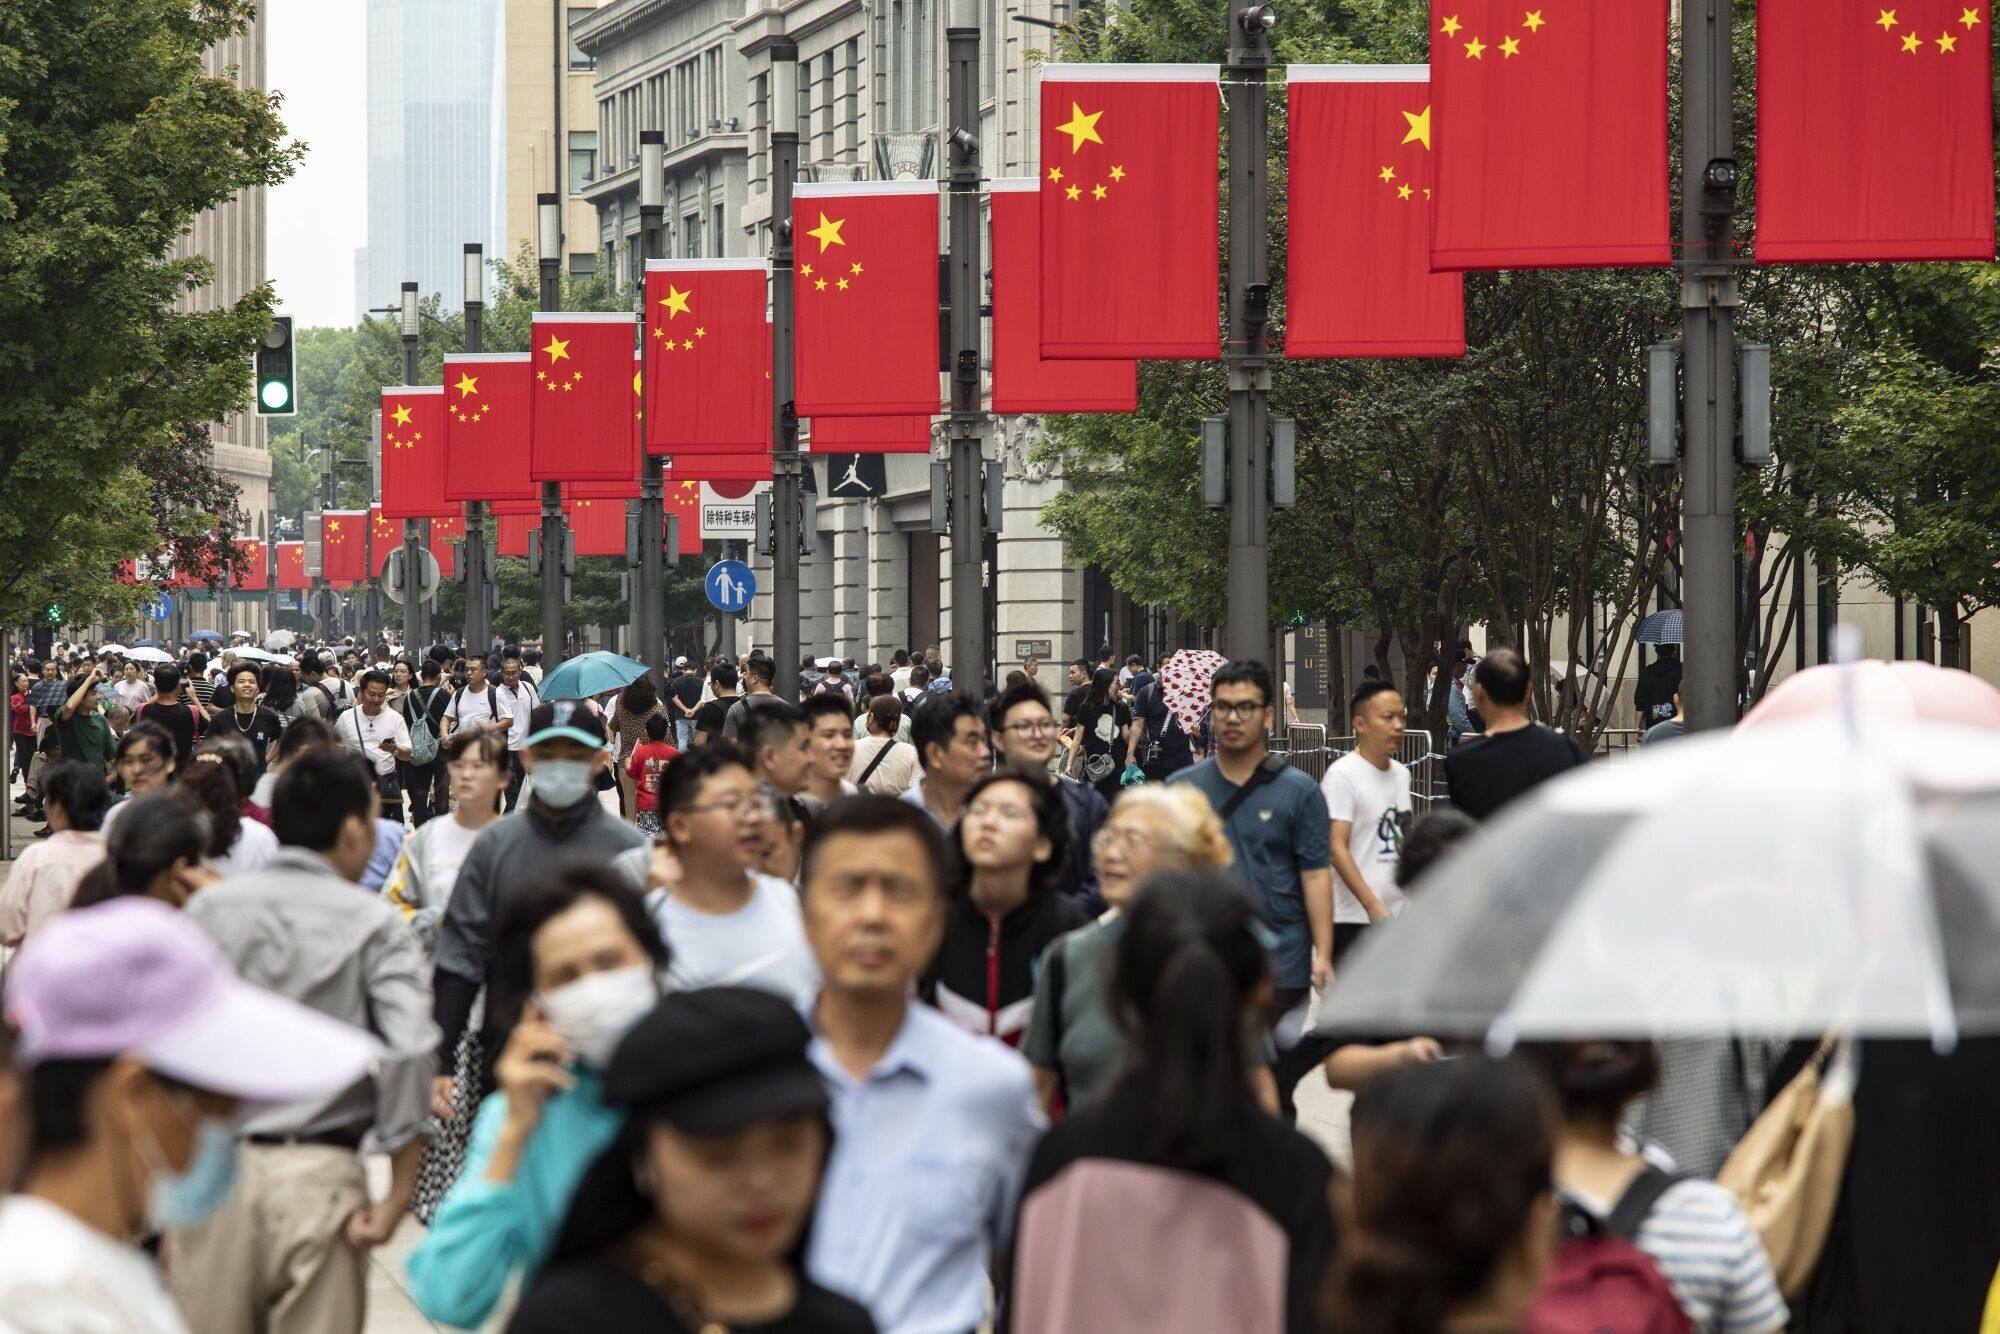 Visitors walk down the main shopping street of Nanjing East Road, one of the city’s main commercial and tourist areas, in Shanghai, China on September 30. China’s “golden week” holiday period has seen a boom in consumption and tourism. Photo: Bloomberg